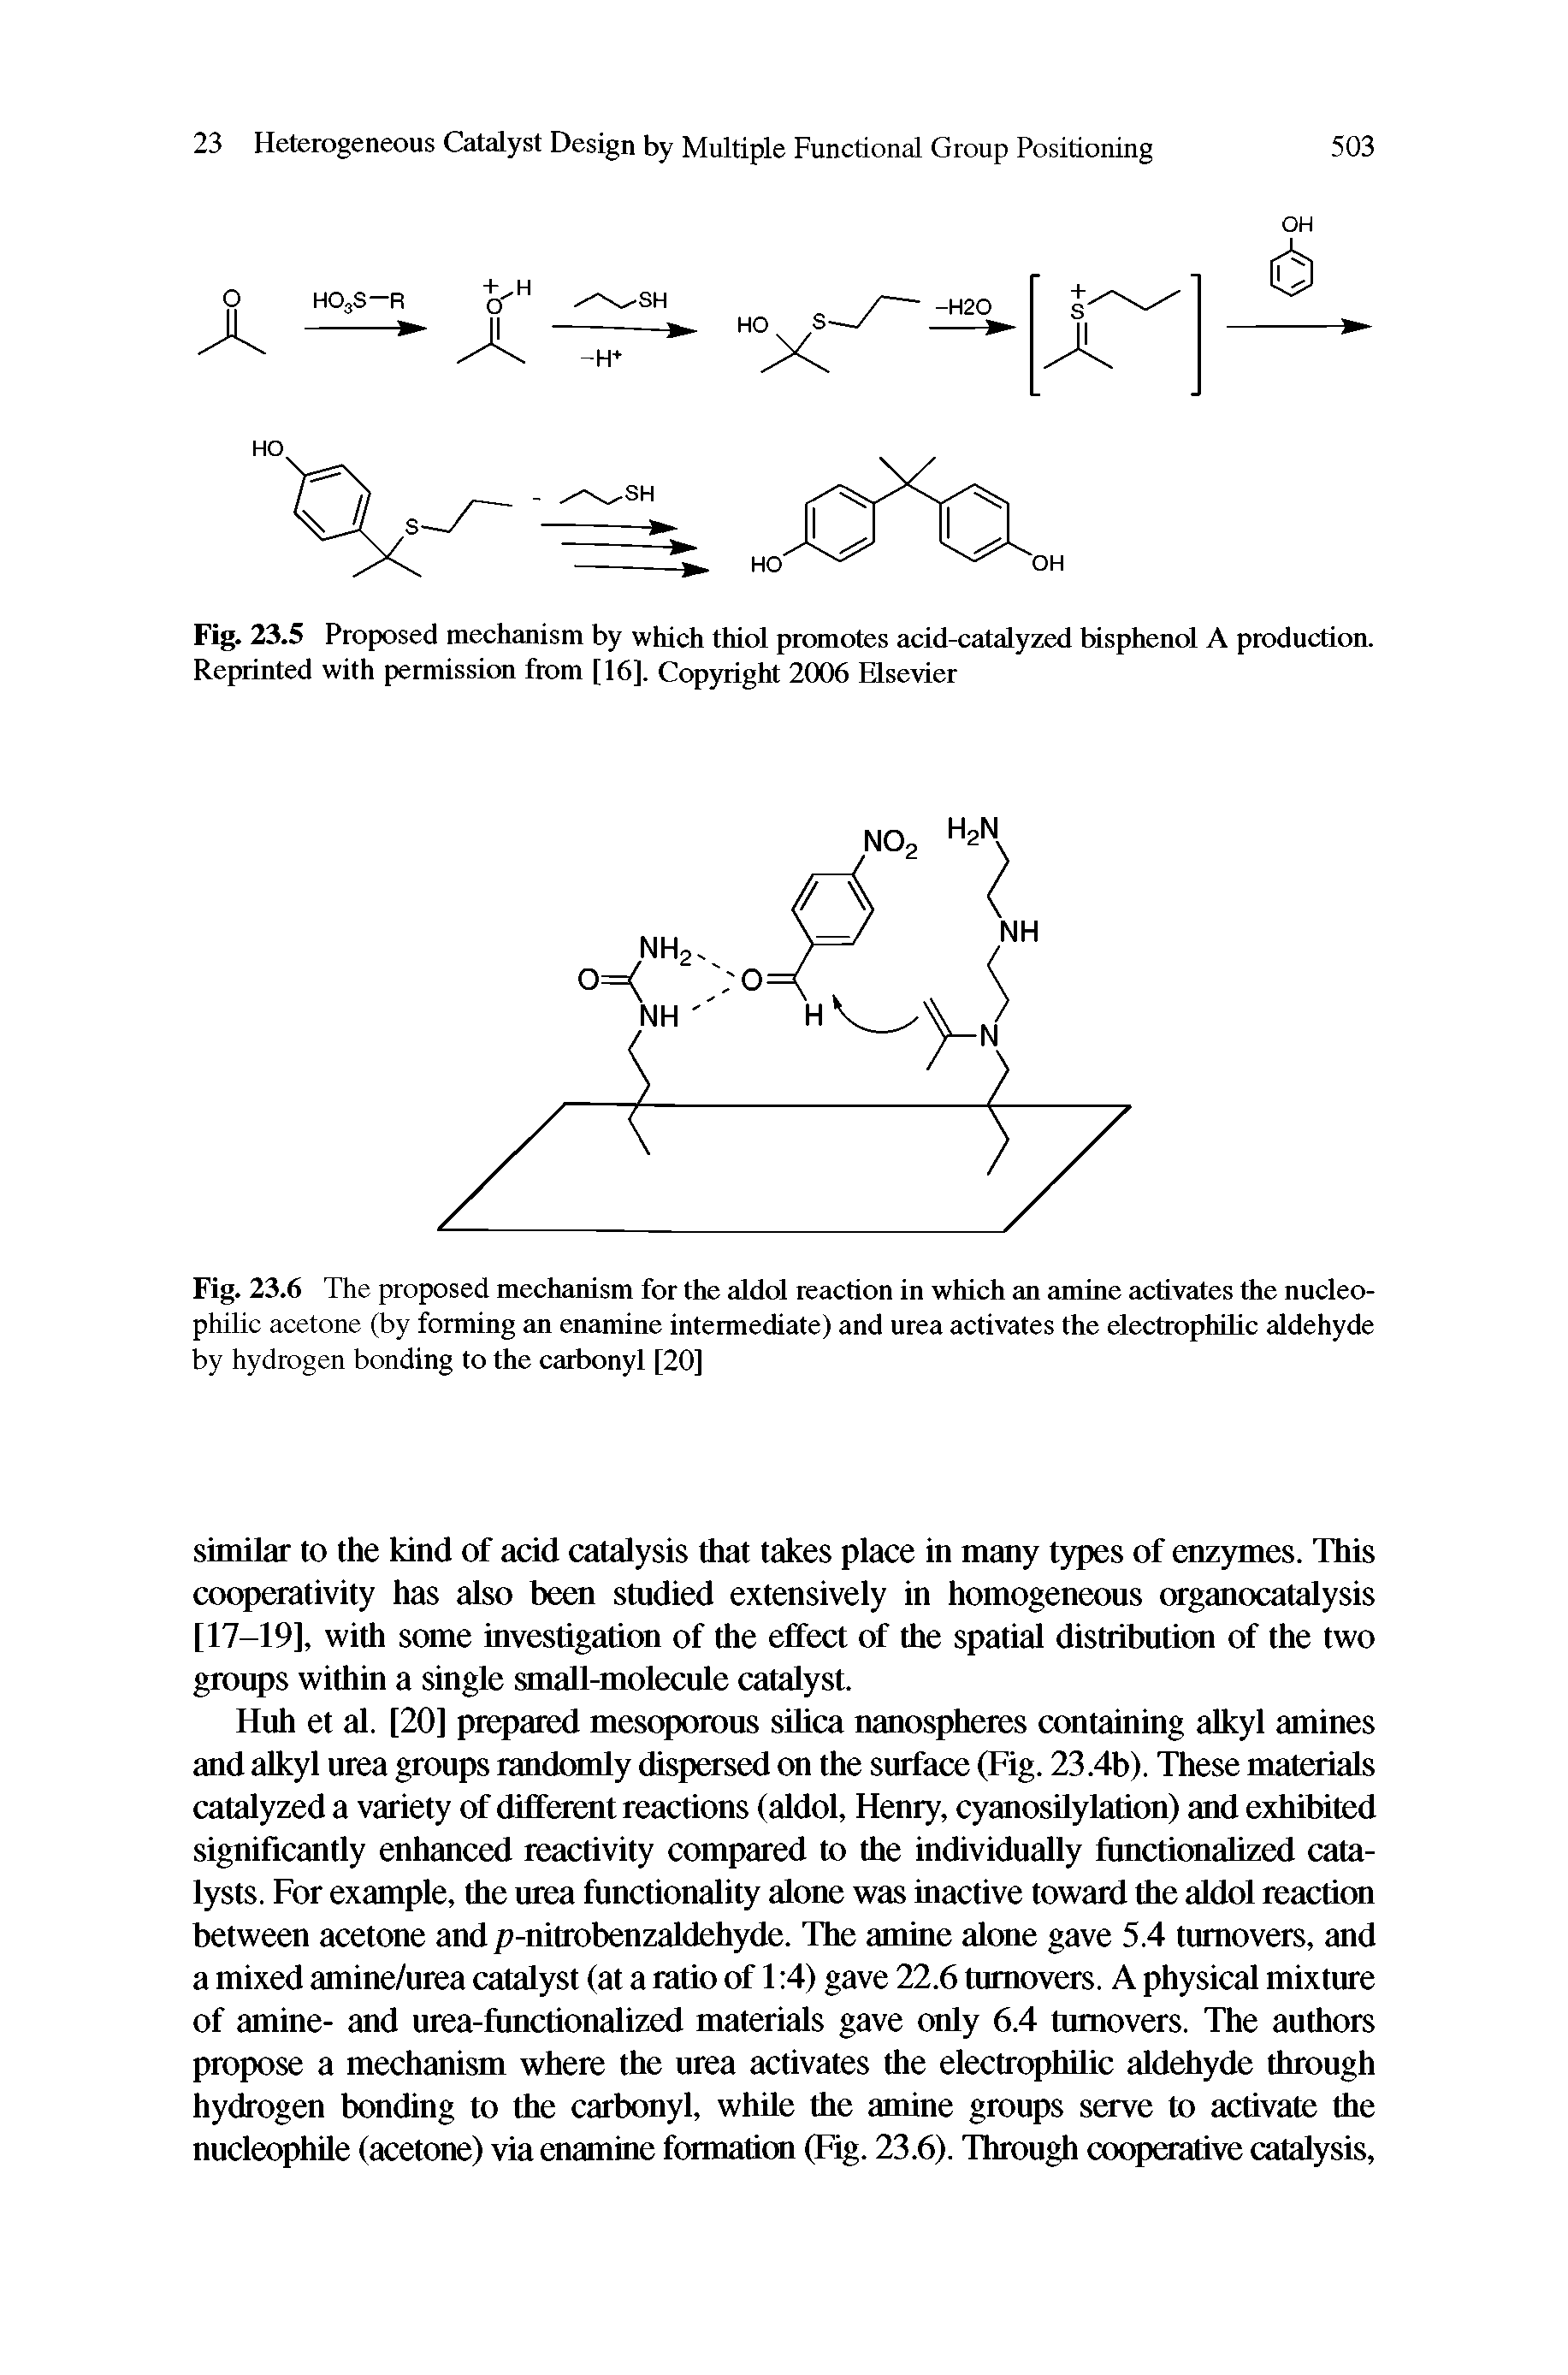 Fig. 23.5 Proposed mechanism by which thiol promotes acid-catalyzed bisphenol A production. Reprinted with permission from [16], Copyright 2006 Elsevier...